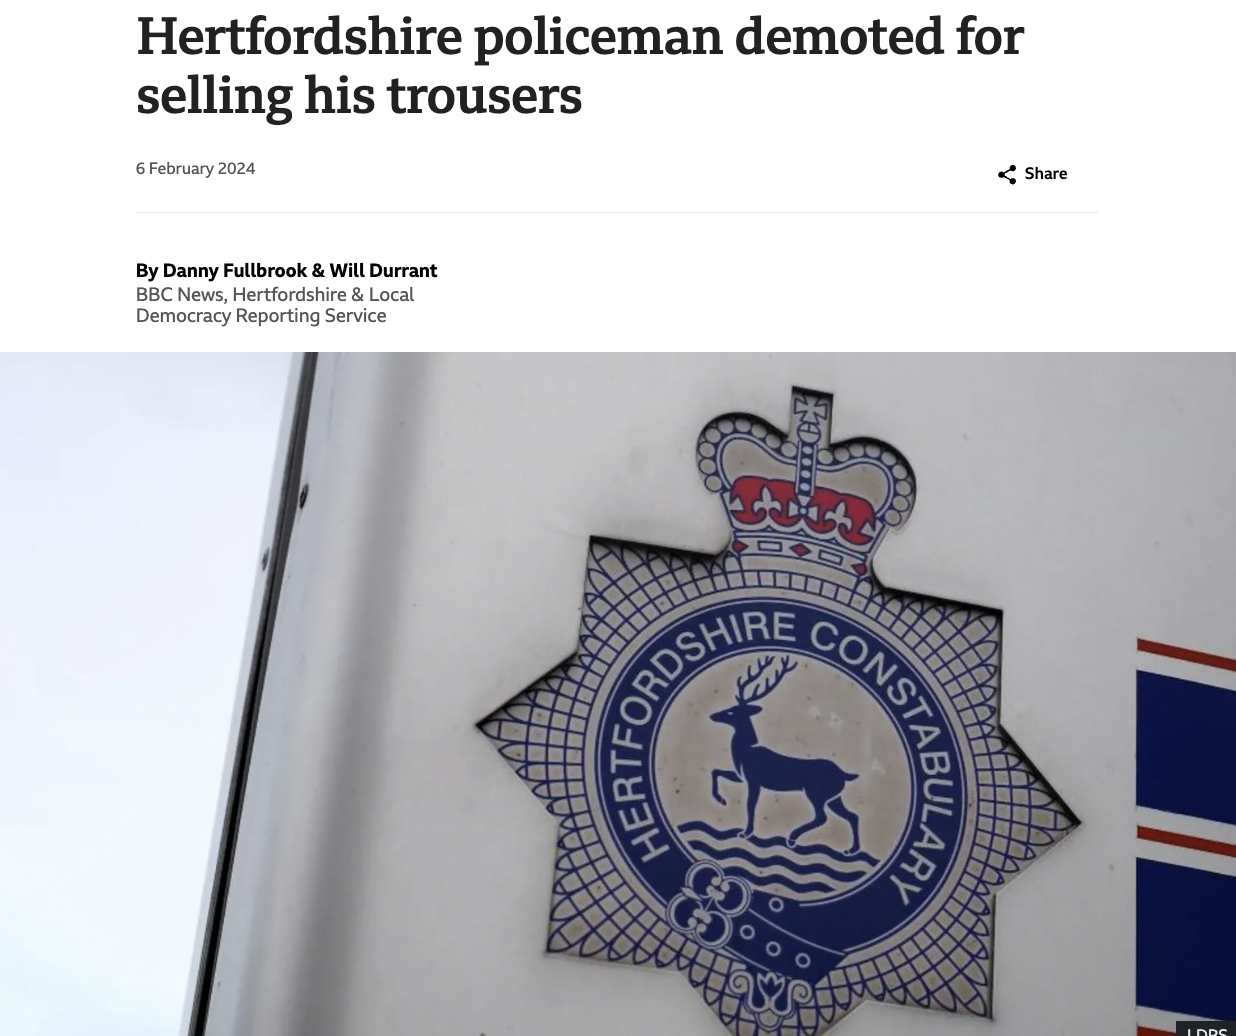 hertfordshire police - Hertfordshire policeman demoted for selling his trousers By Danny Fullbrook & Will Durrant Bbc News, Hertfordshire & Local Democracy Reporting Service Hertfords Dum Constabo Fordshire Bulary Idas